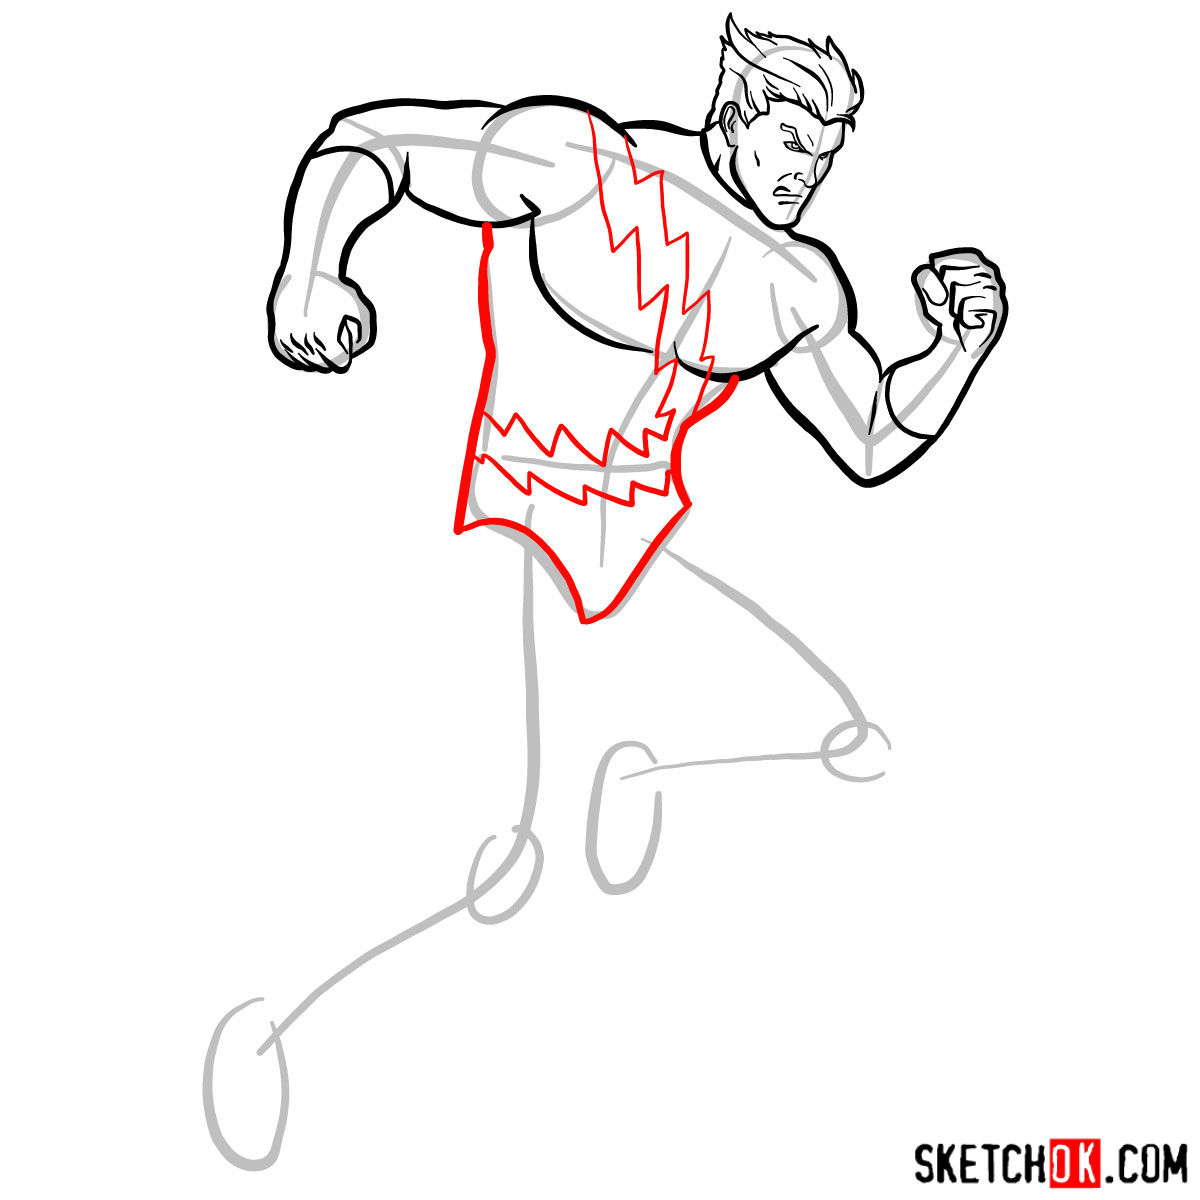 How to draw Quicksilver from Marvel Comics - step 08